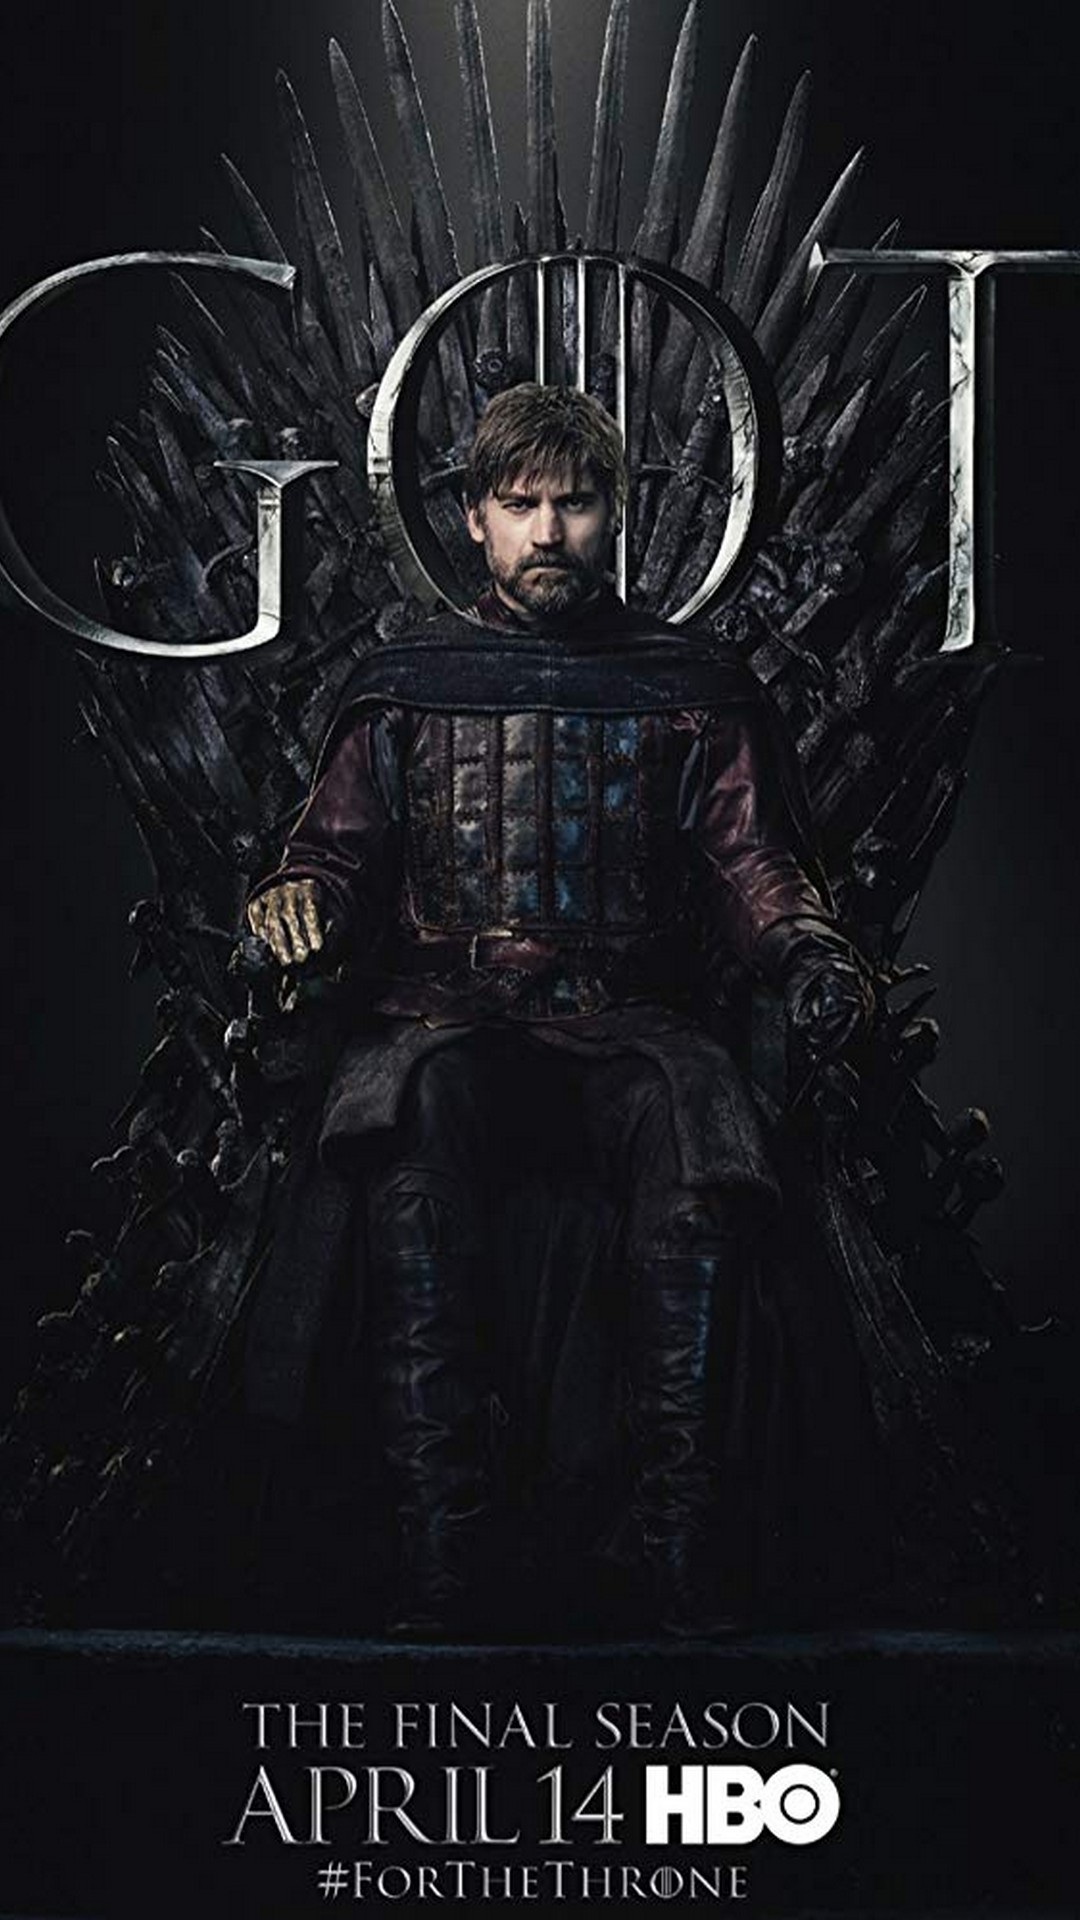 Game of Thrones Season 8 Poster HD 2019 Movie Poster Wallpaper HD